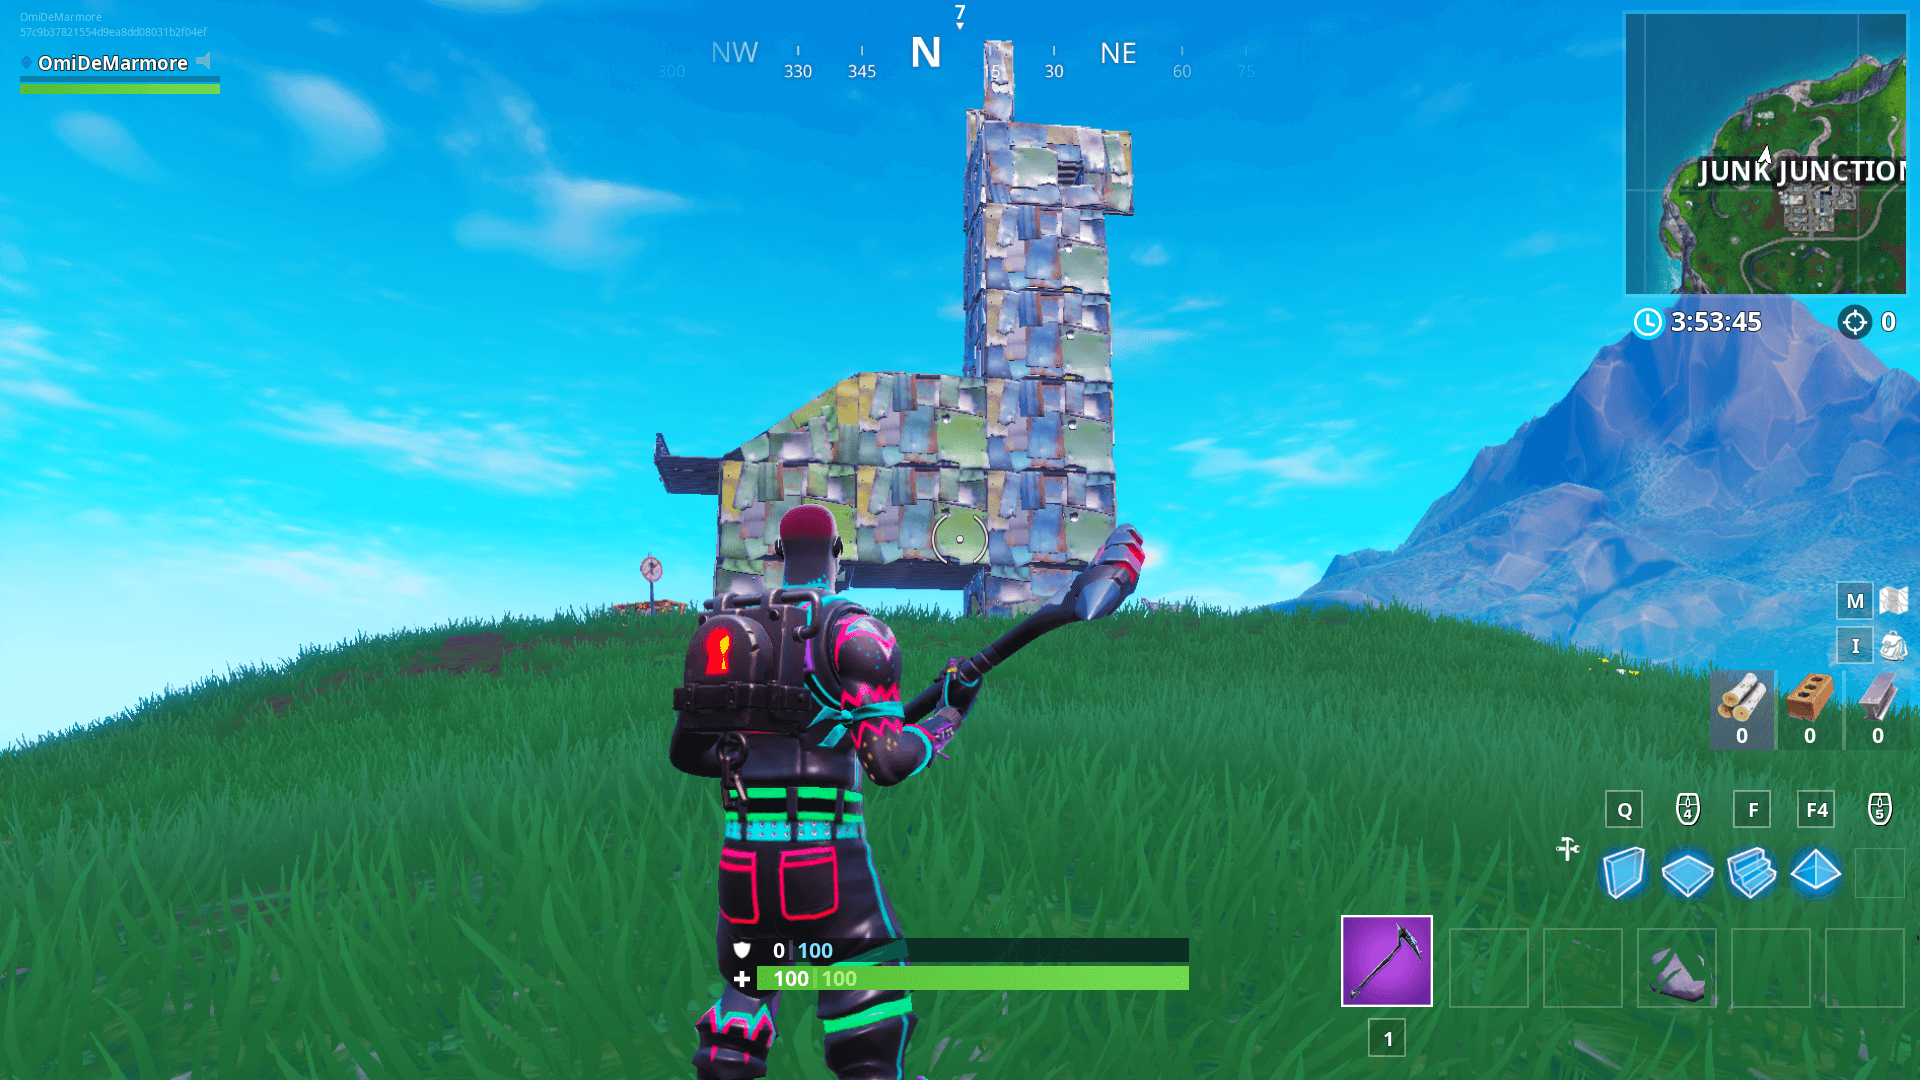 Fortnite Wooden Rabbit Stone Pig And Metal Llama Locations - where to find a wooden rabbit a stone pig and a metal llama in fortnite for the season 8 week 6 challenge